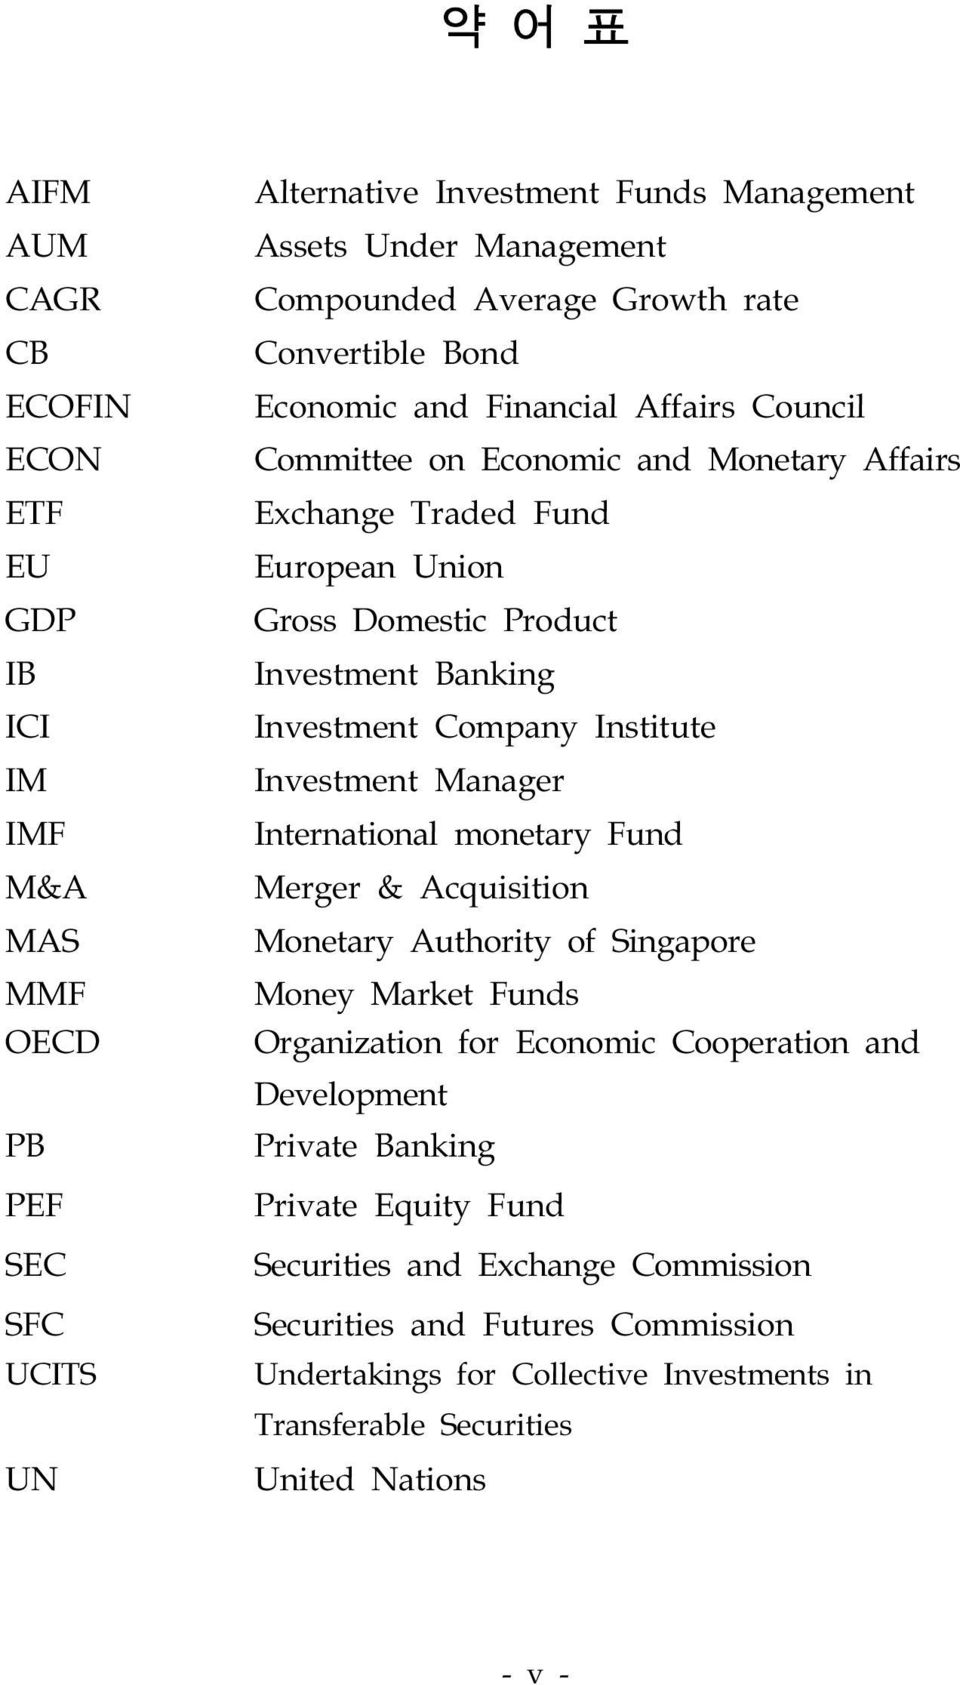 Investment Company Institute Investment Manager International monetary Fund Merger & Acquisition Monetary Authority of Singapore Money Market Funds Organization for Economic Cooperation and